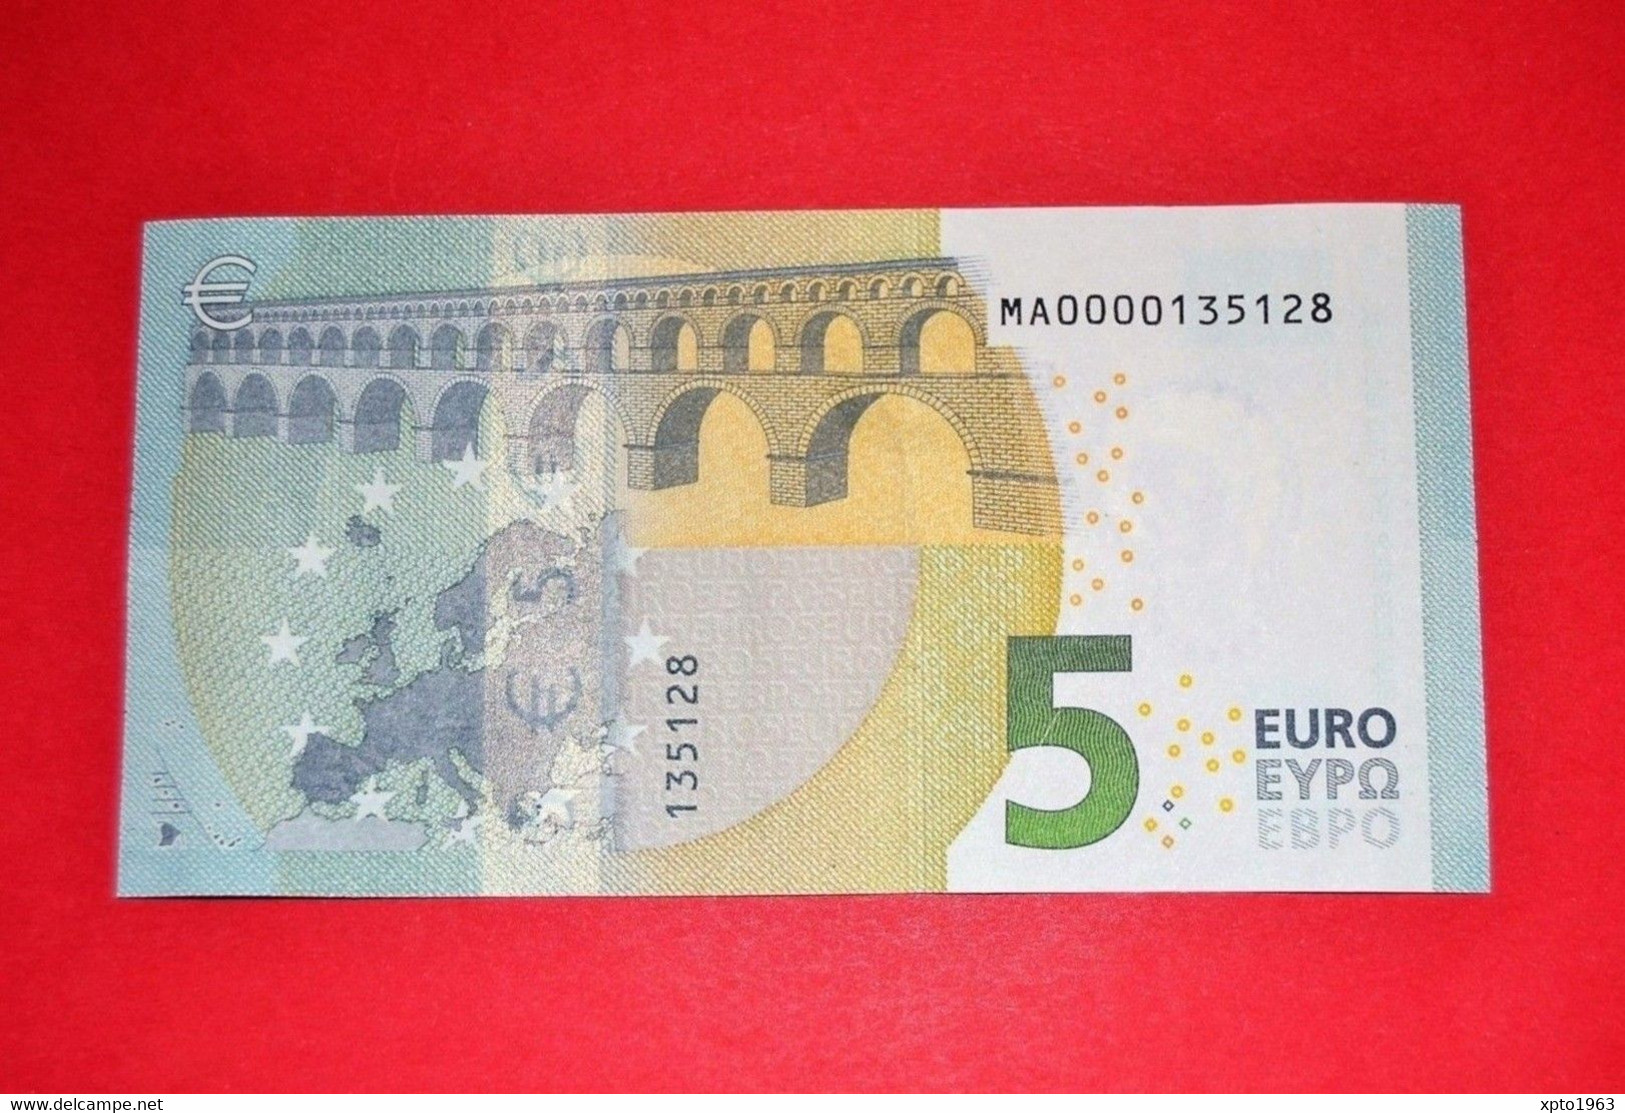 5 EURO - Low Serial Number - MA0000135128 - PORTUGAL M001A6 - UNC - NEUF - 5 Euro